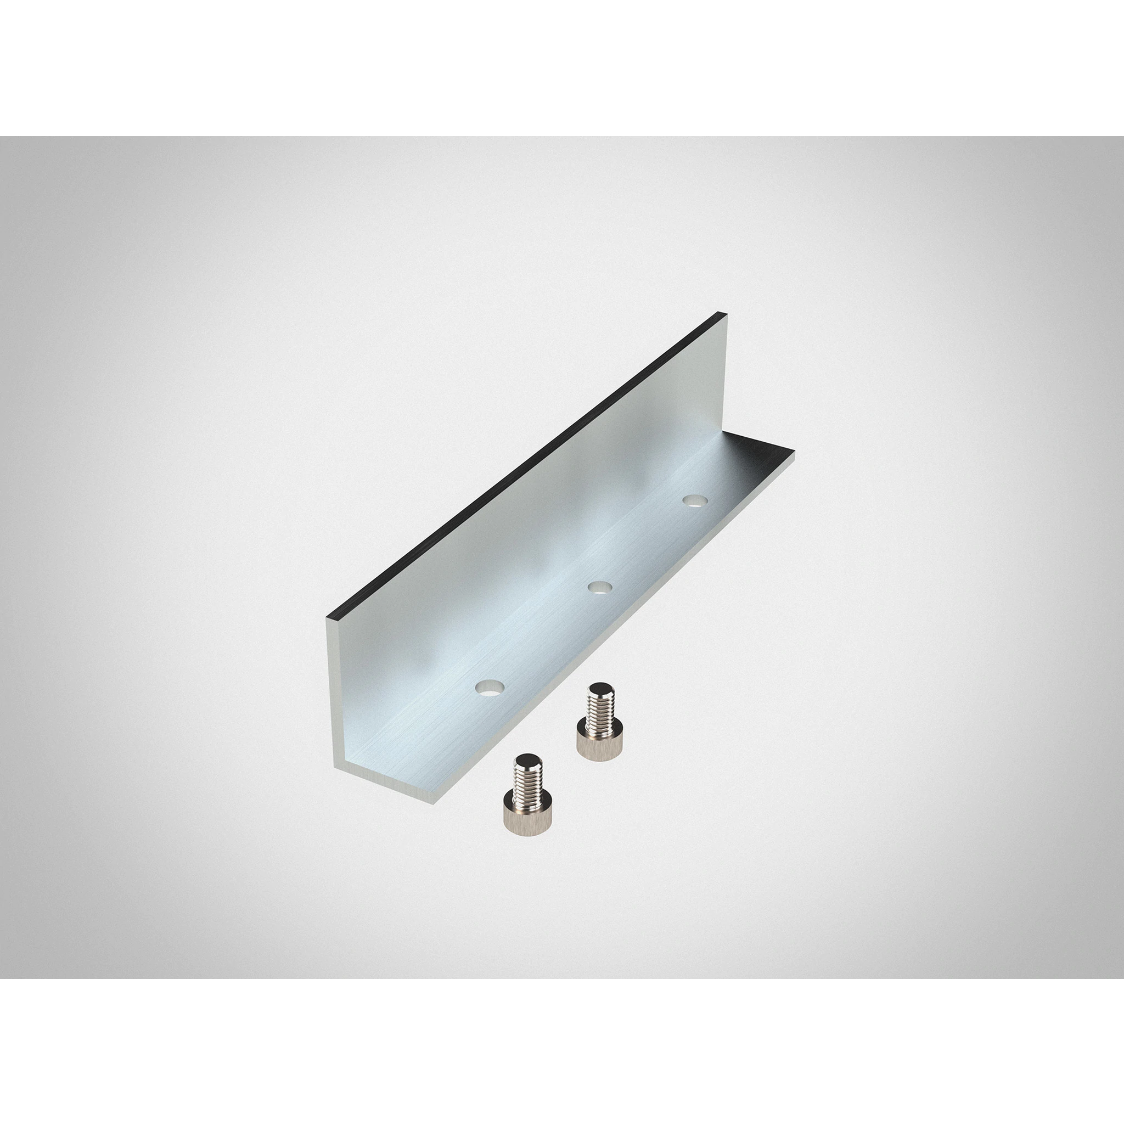 The Short Angle Accessory has 2 stainless steel socket head screws for mounting to a Guide Rail Square or Precision Triangle.